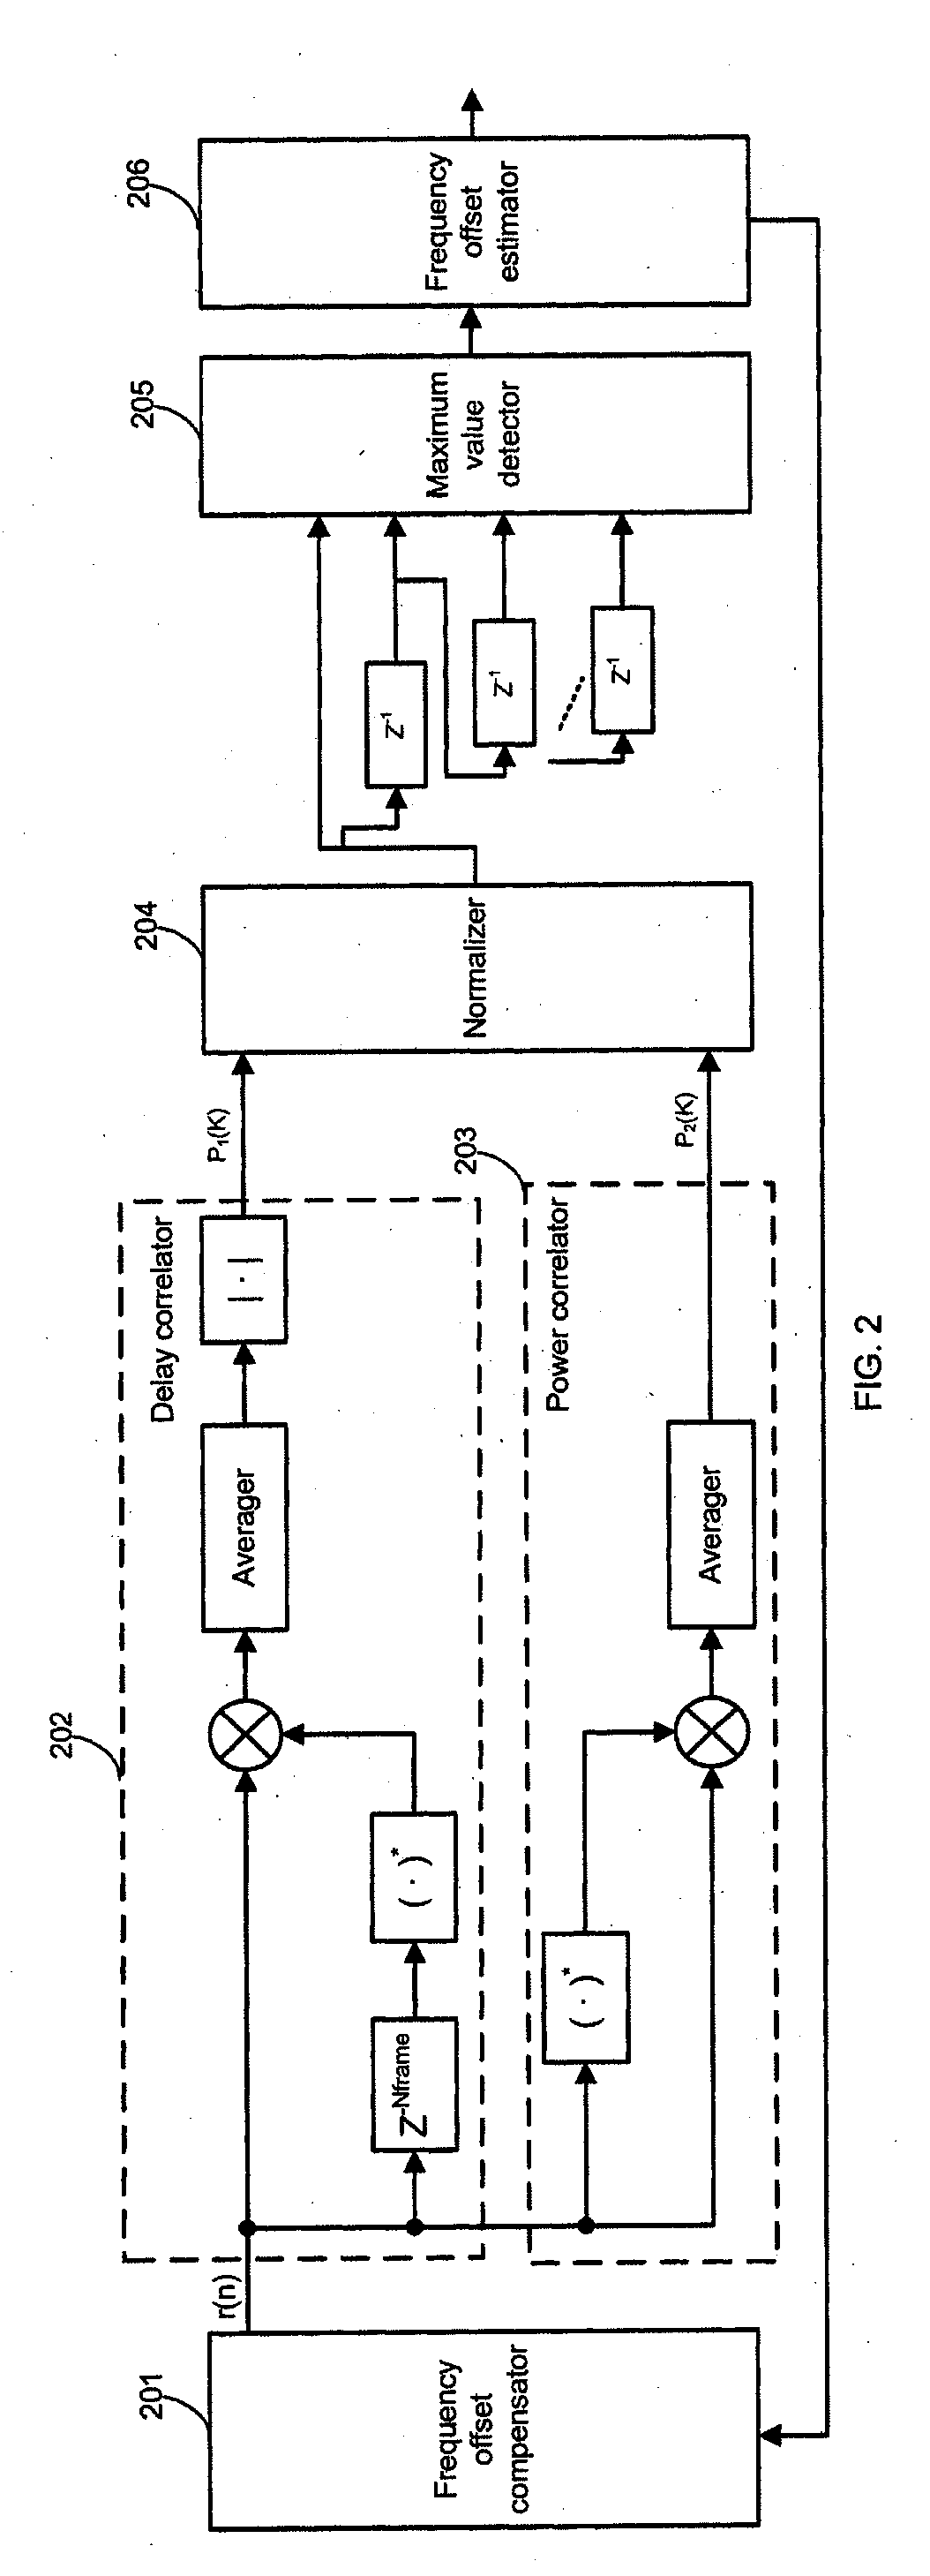 Apparatus and method of frame synchronization in broad band wireless communication systems